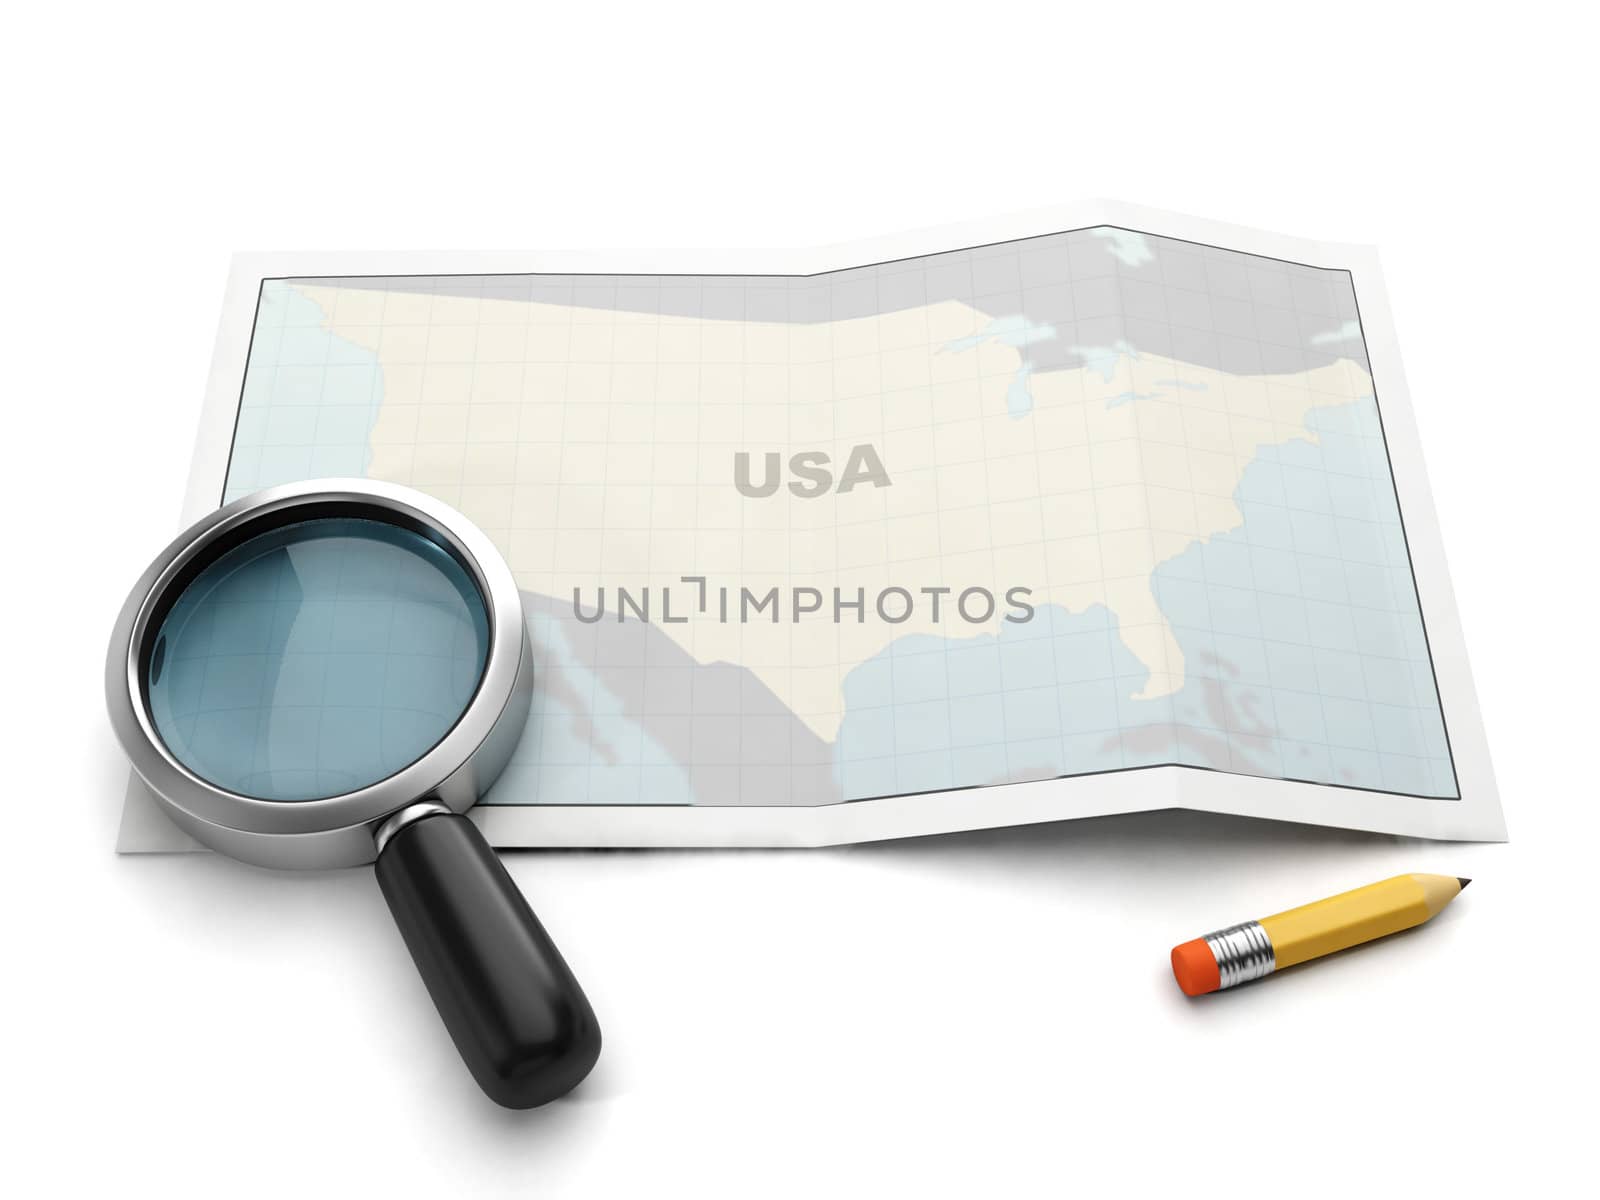 Search on the map. U.S. map magnifier and pencil on white backgr by kolobsek